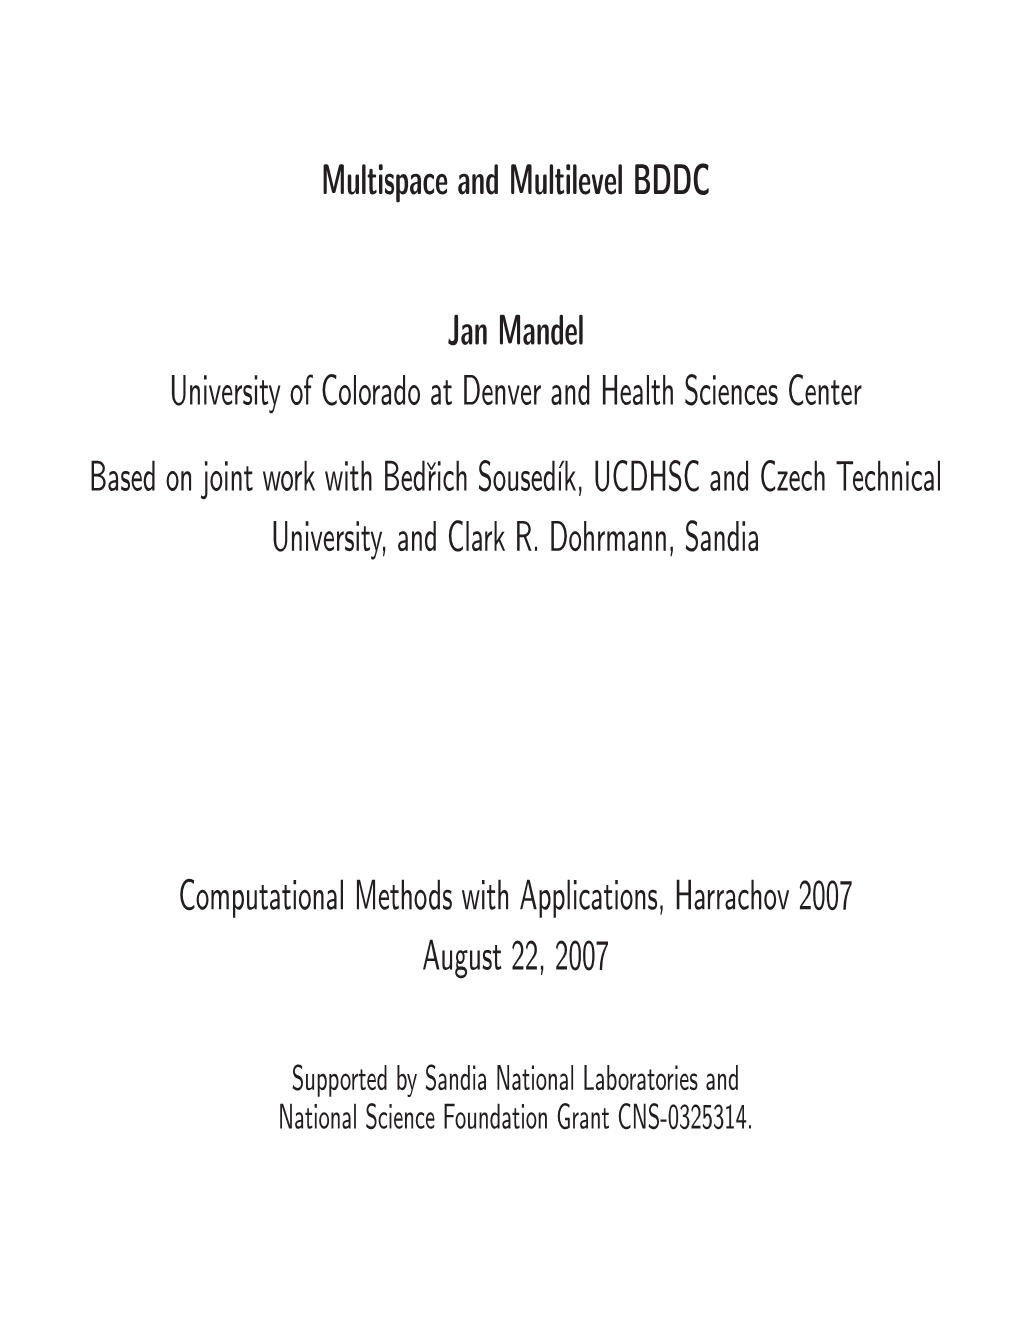 Multispace and Multilevel BDDC Jan Mandel University of Colorado at Denver and Health Sciences Center Based on Joint Work with B